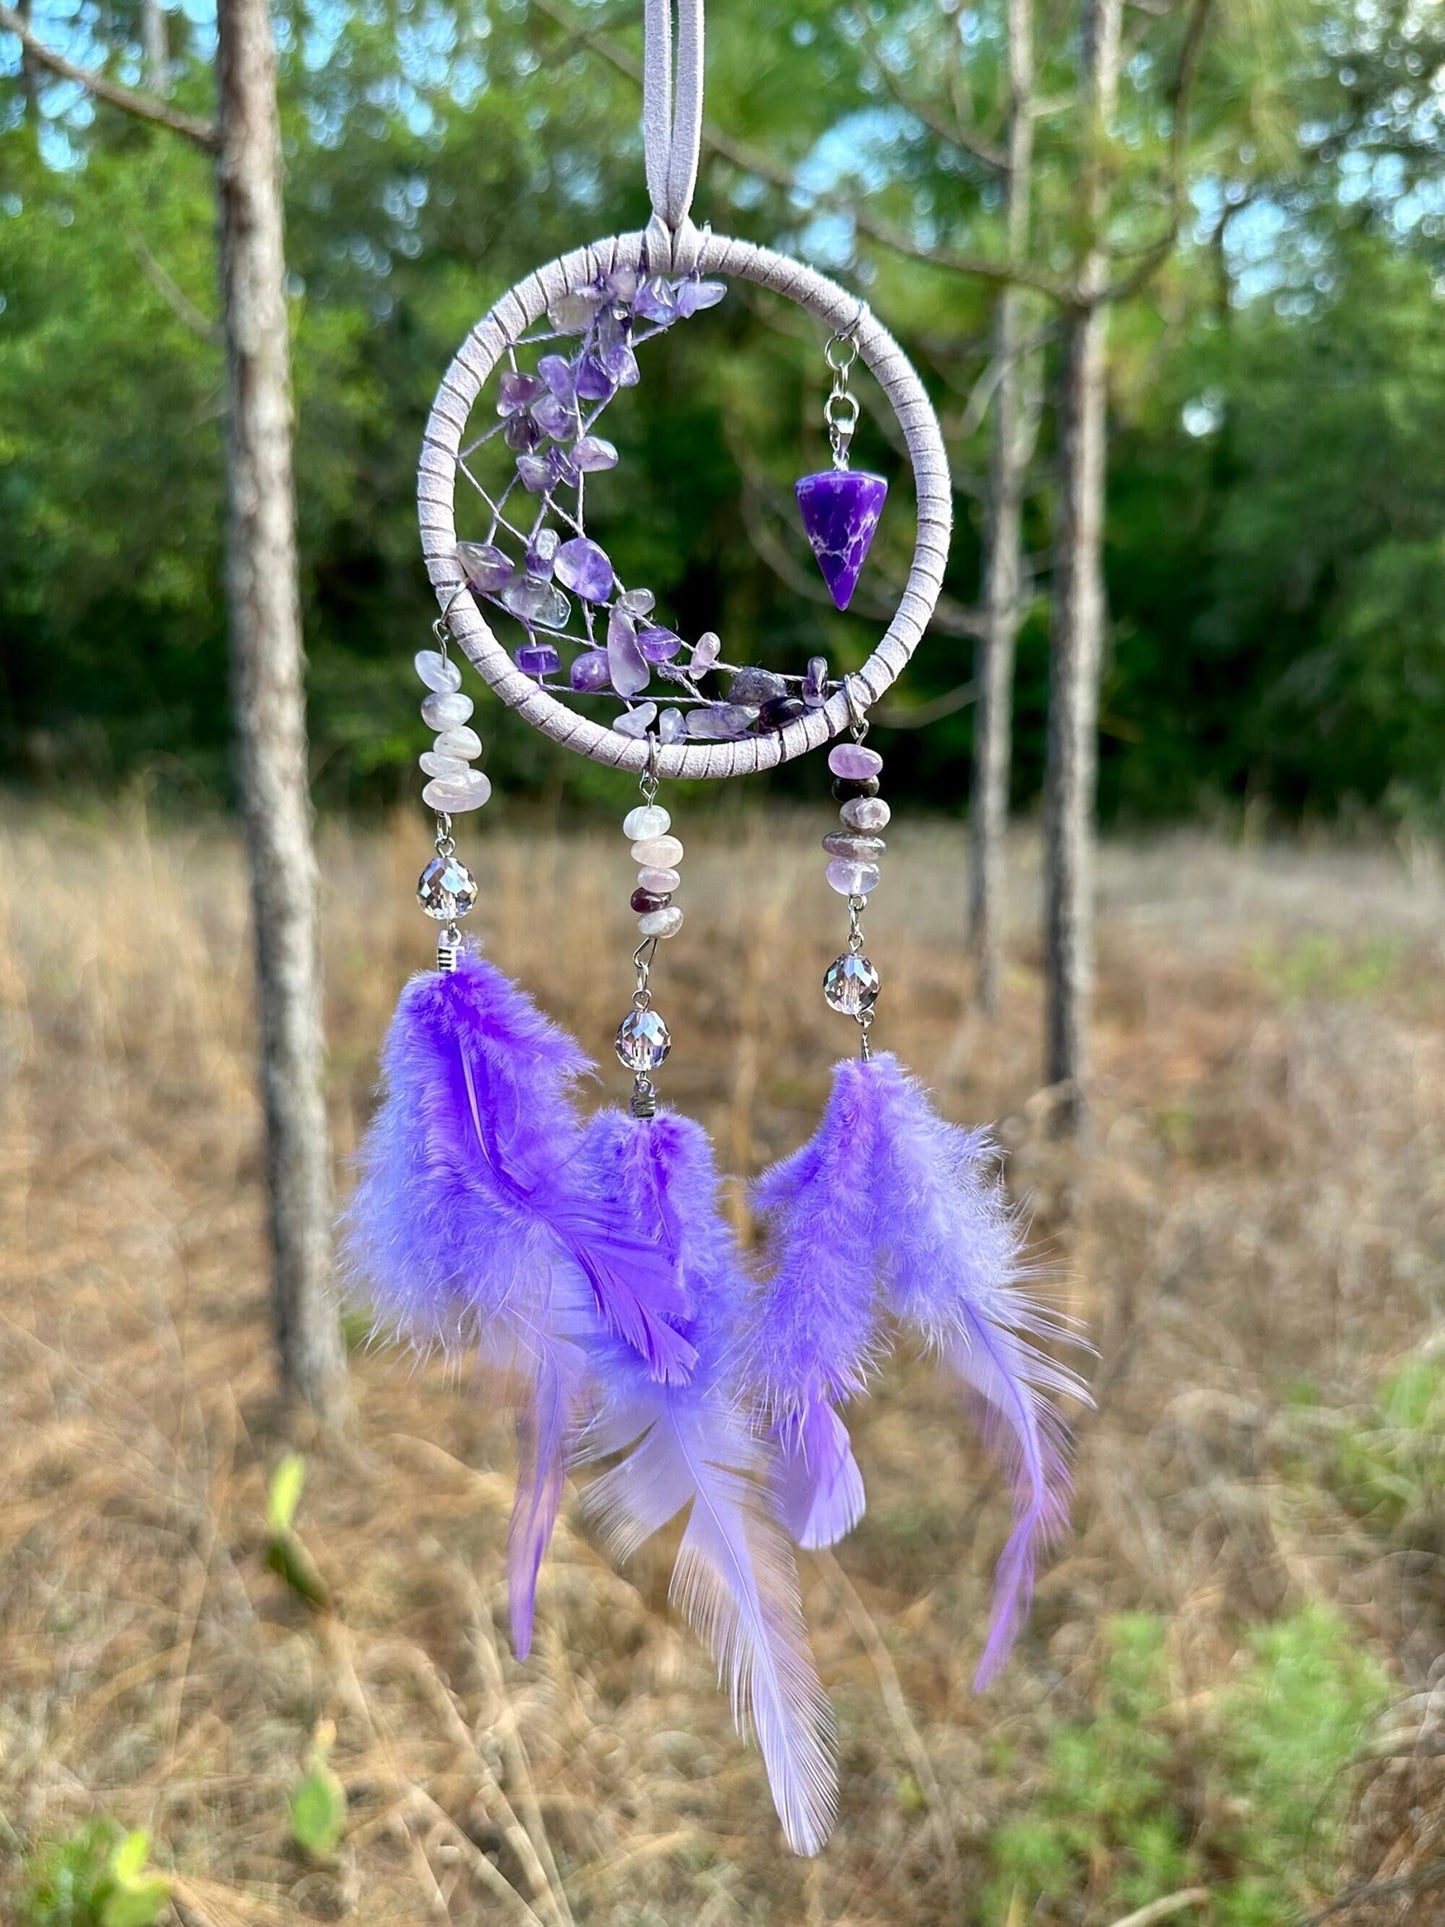 Purple Crescent Moon Dreamcatcher with Purple Feathers & Hanging Charm - Amethyst Stones -- Rearview Mirror Hanging or Wall Hanging